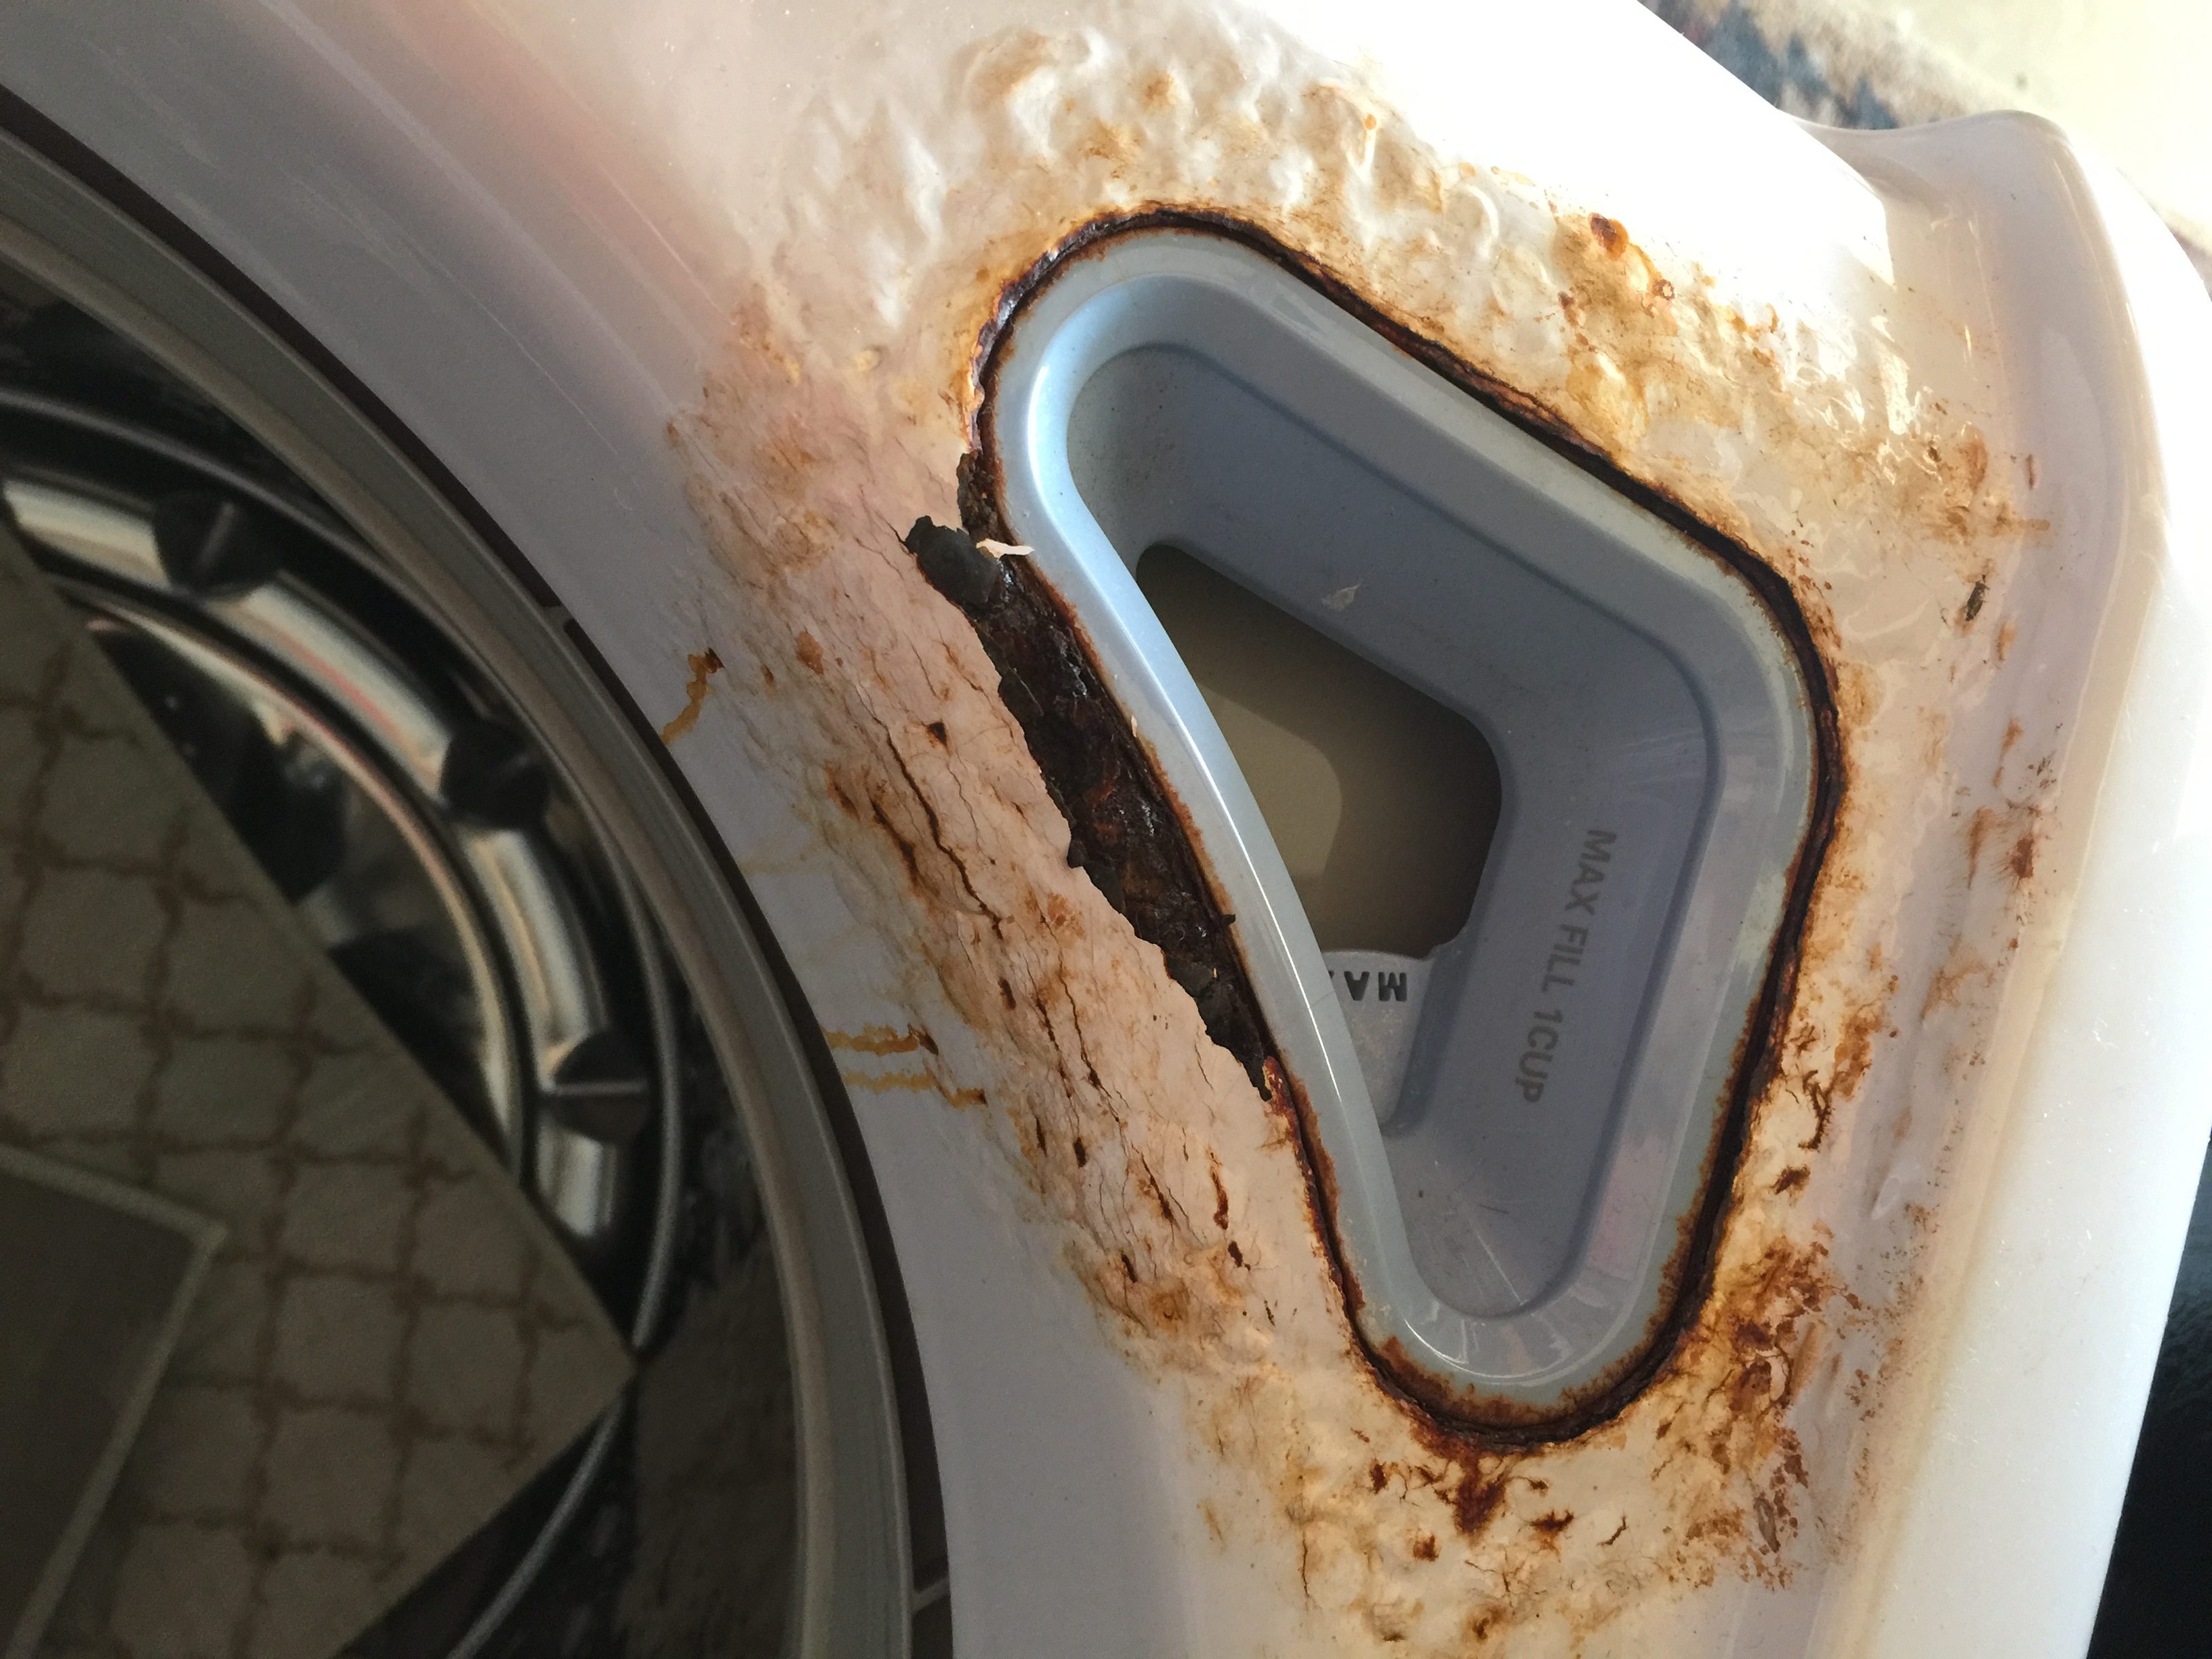 Top 2,046 Complaints and Reviews about LG Washing Machines